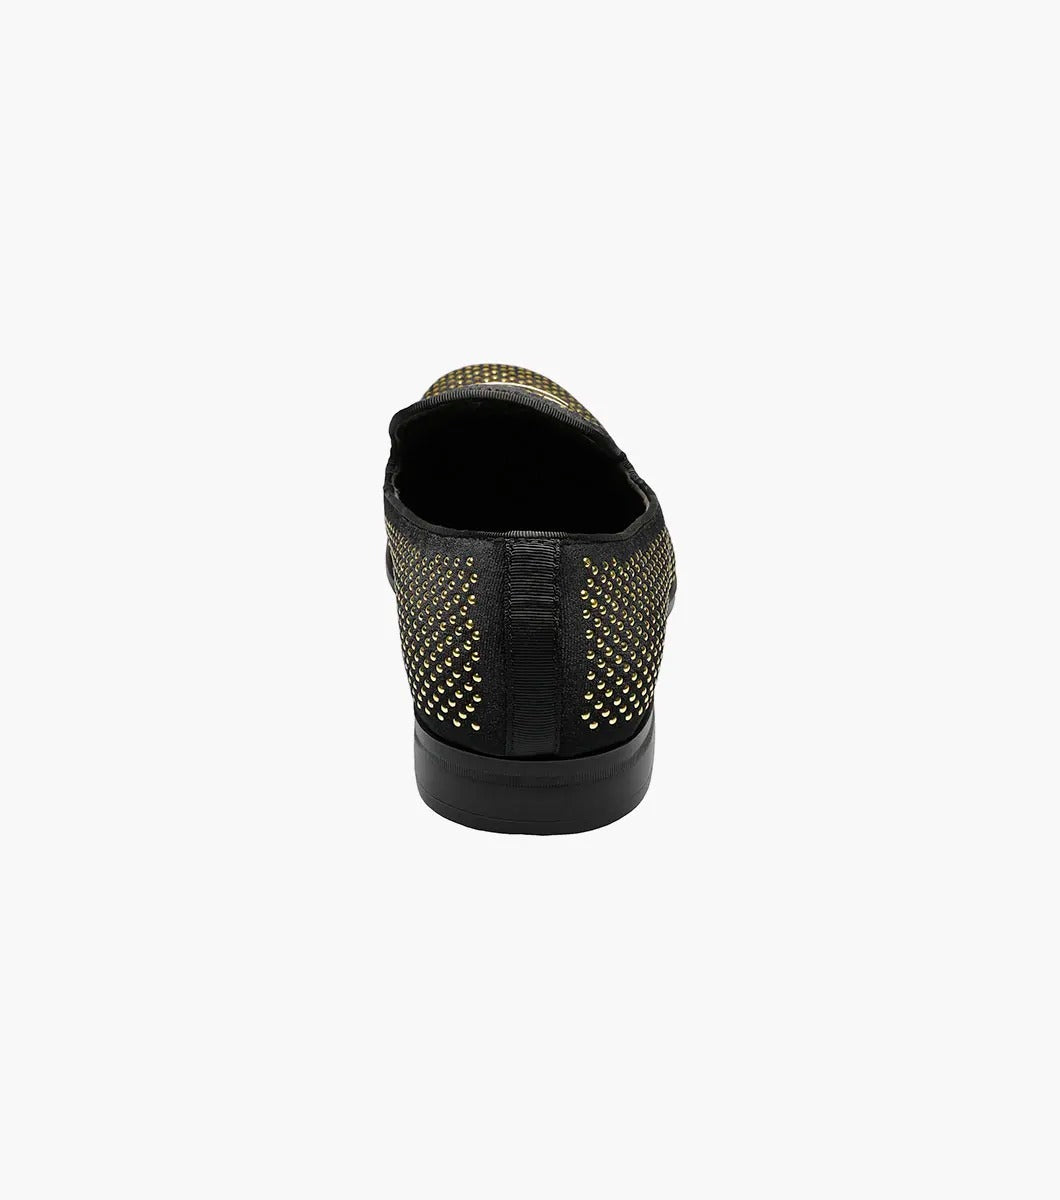 Stacy Adams - SWAGGER Studded Slip On - Black and Gold - 25228-715